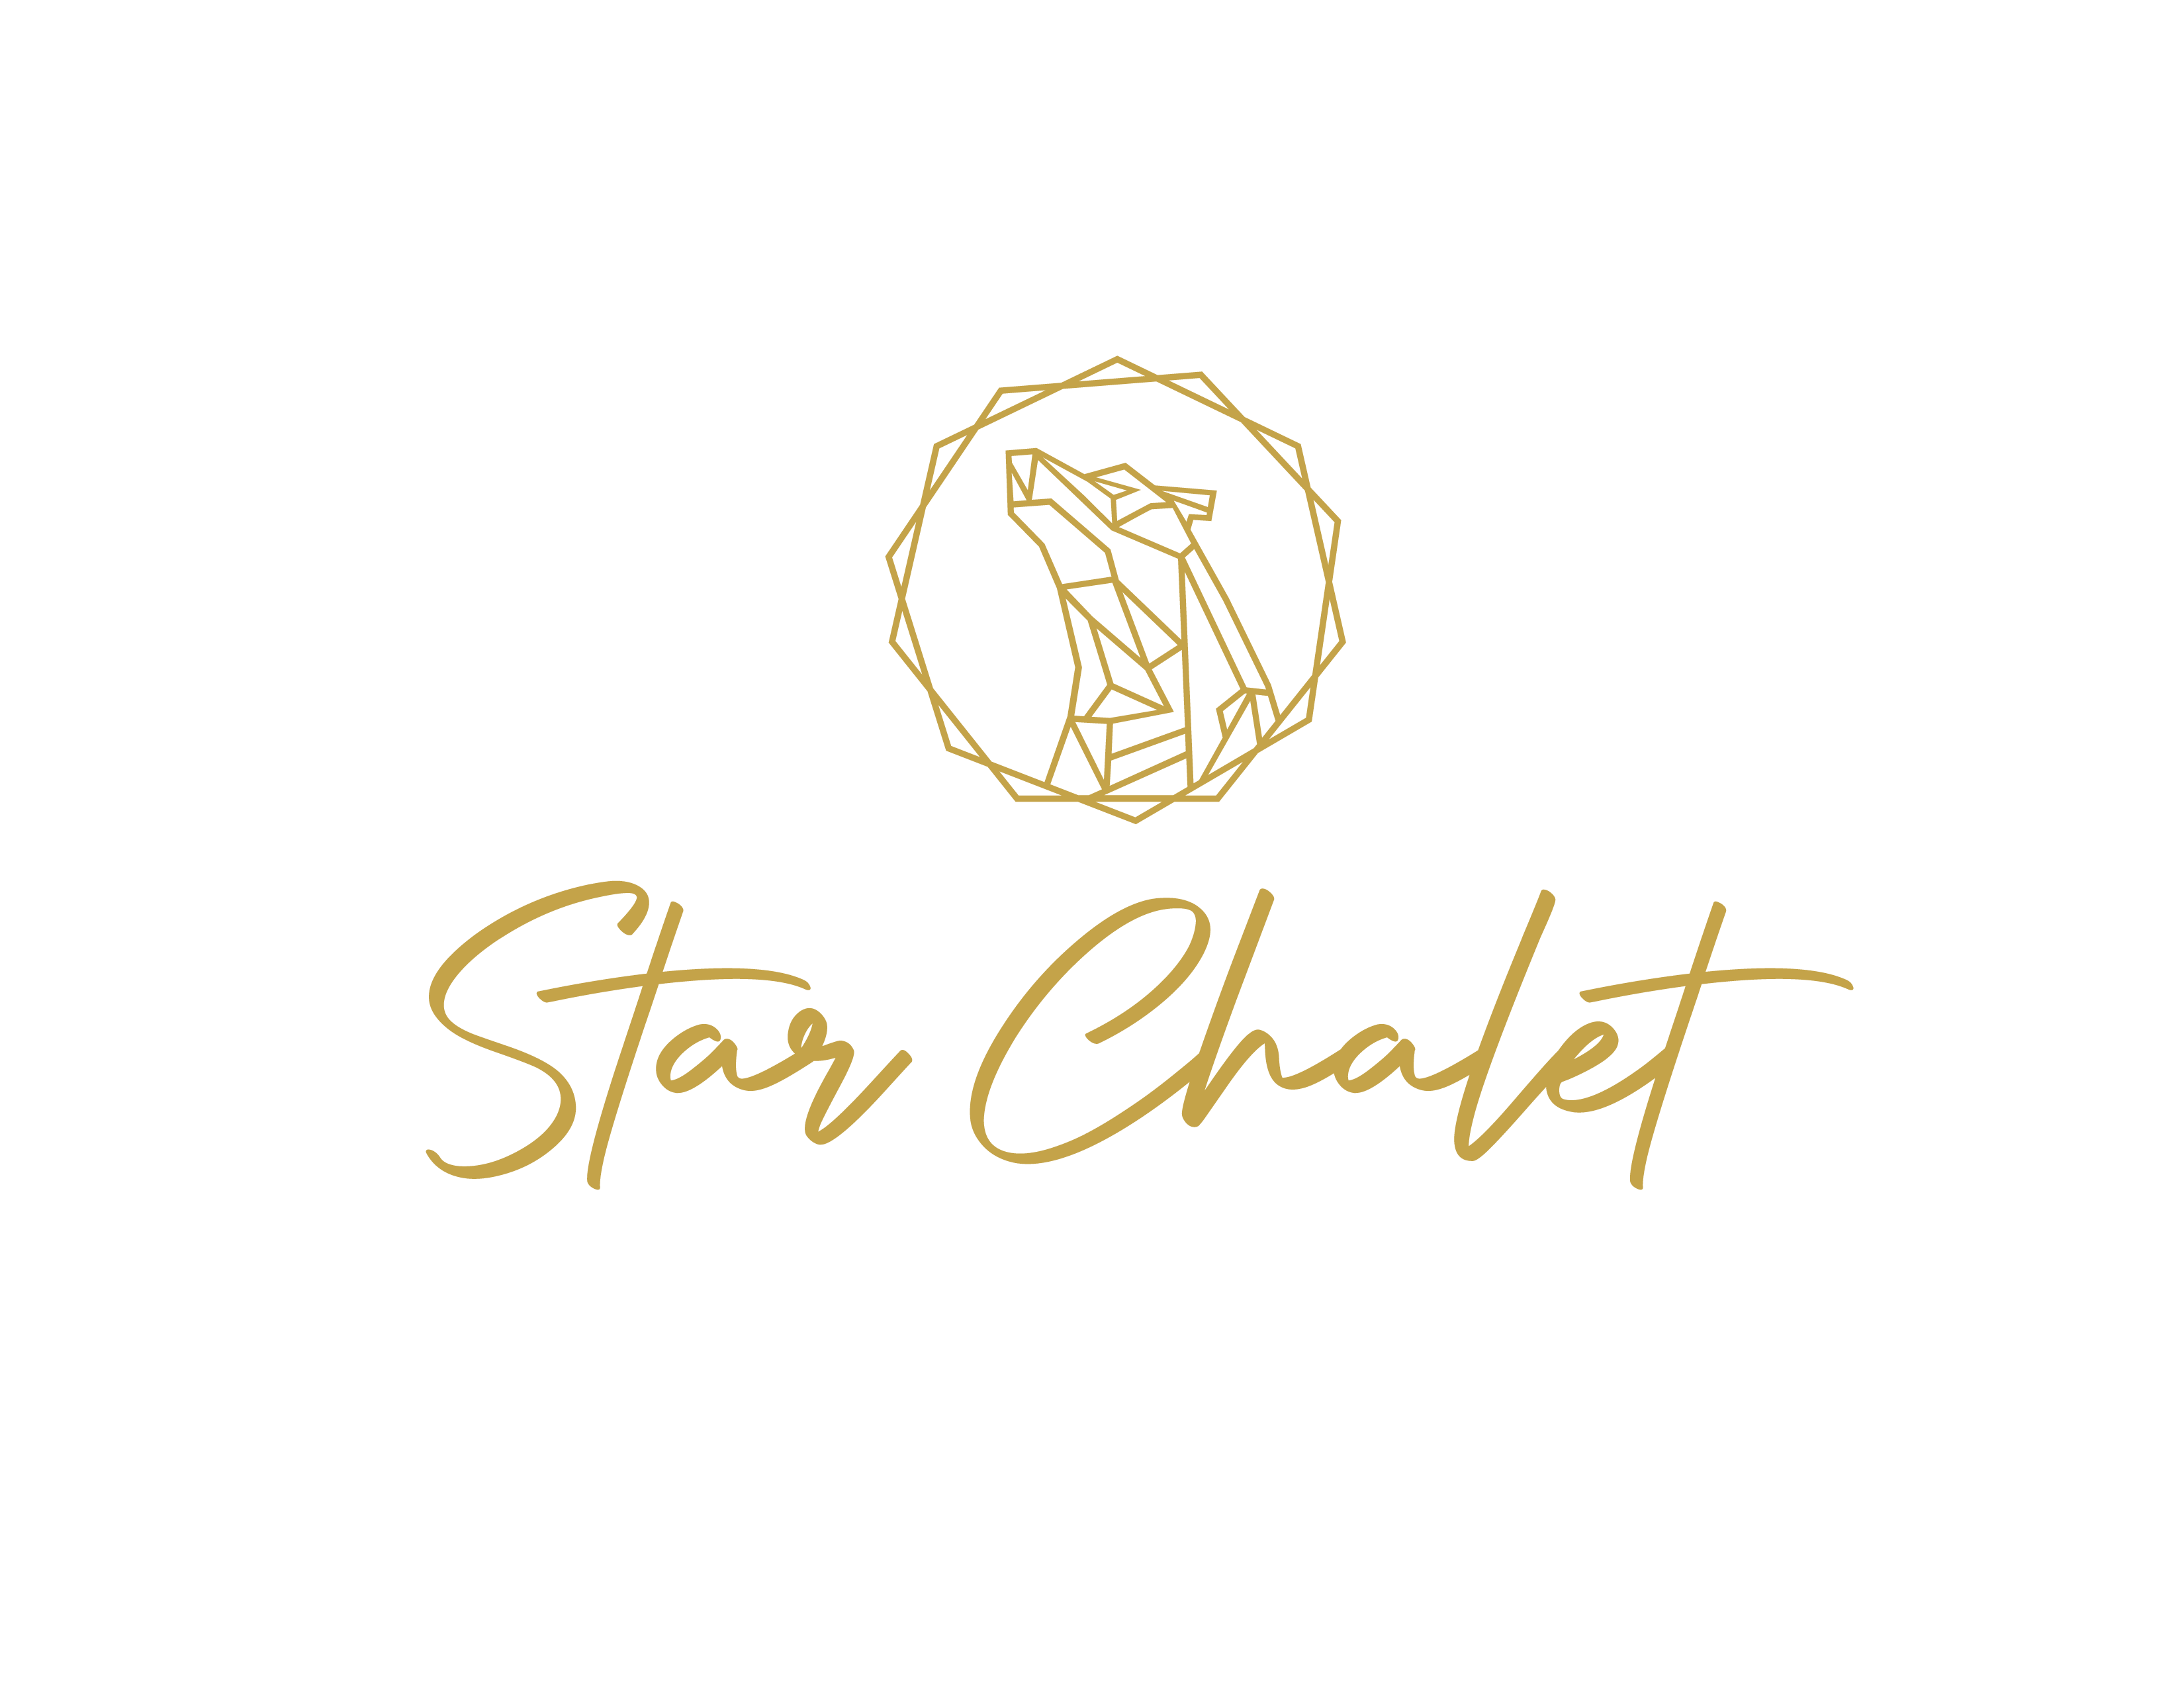 Hard Rock Hotel Budapest Unveils the Star Chalet